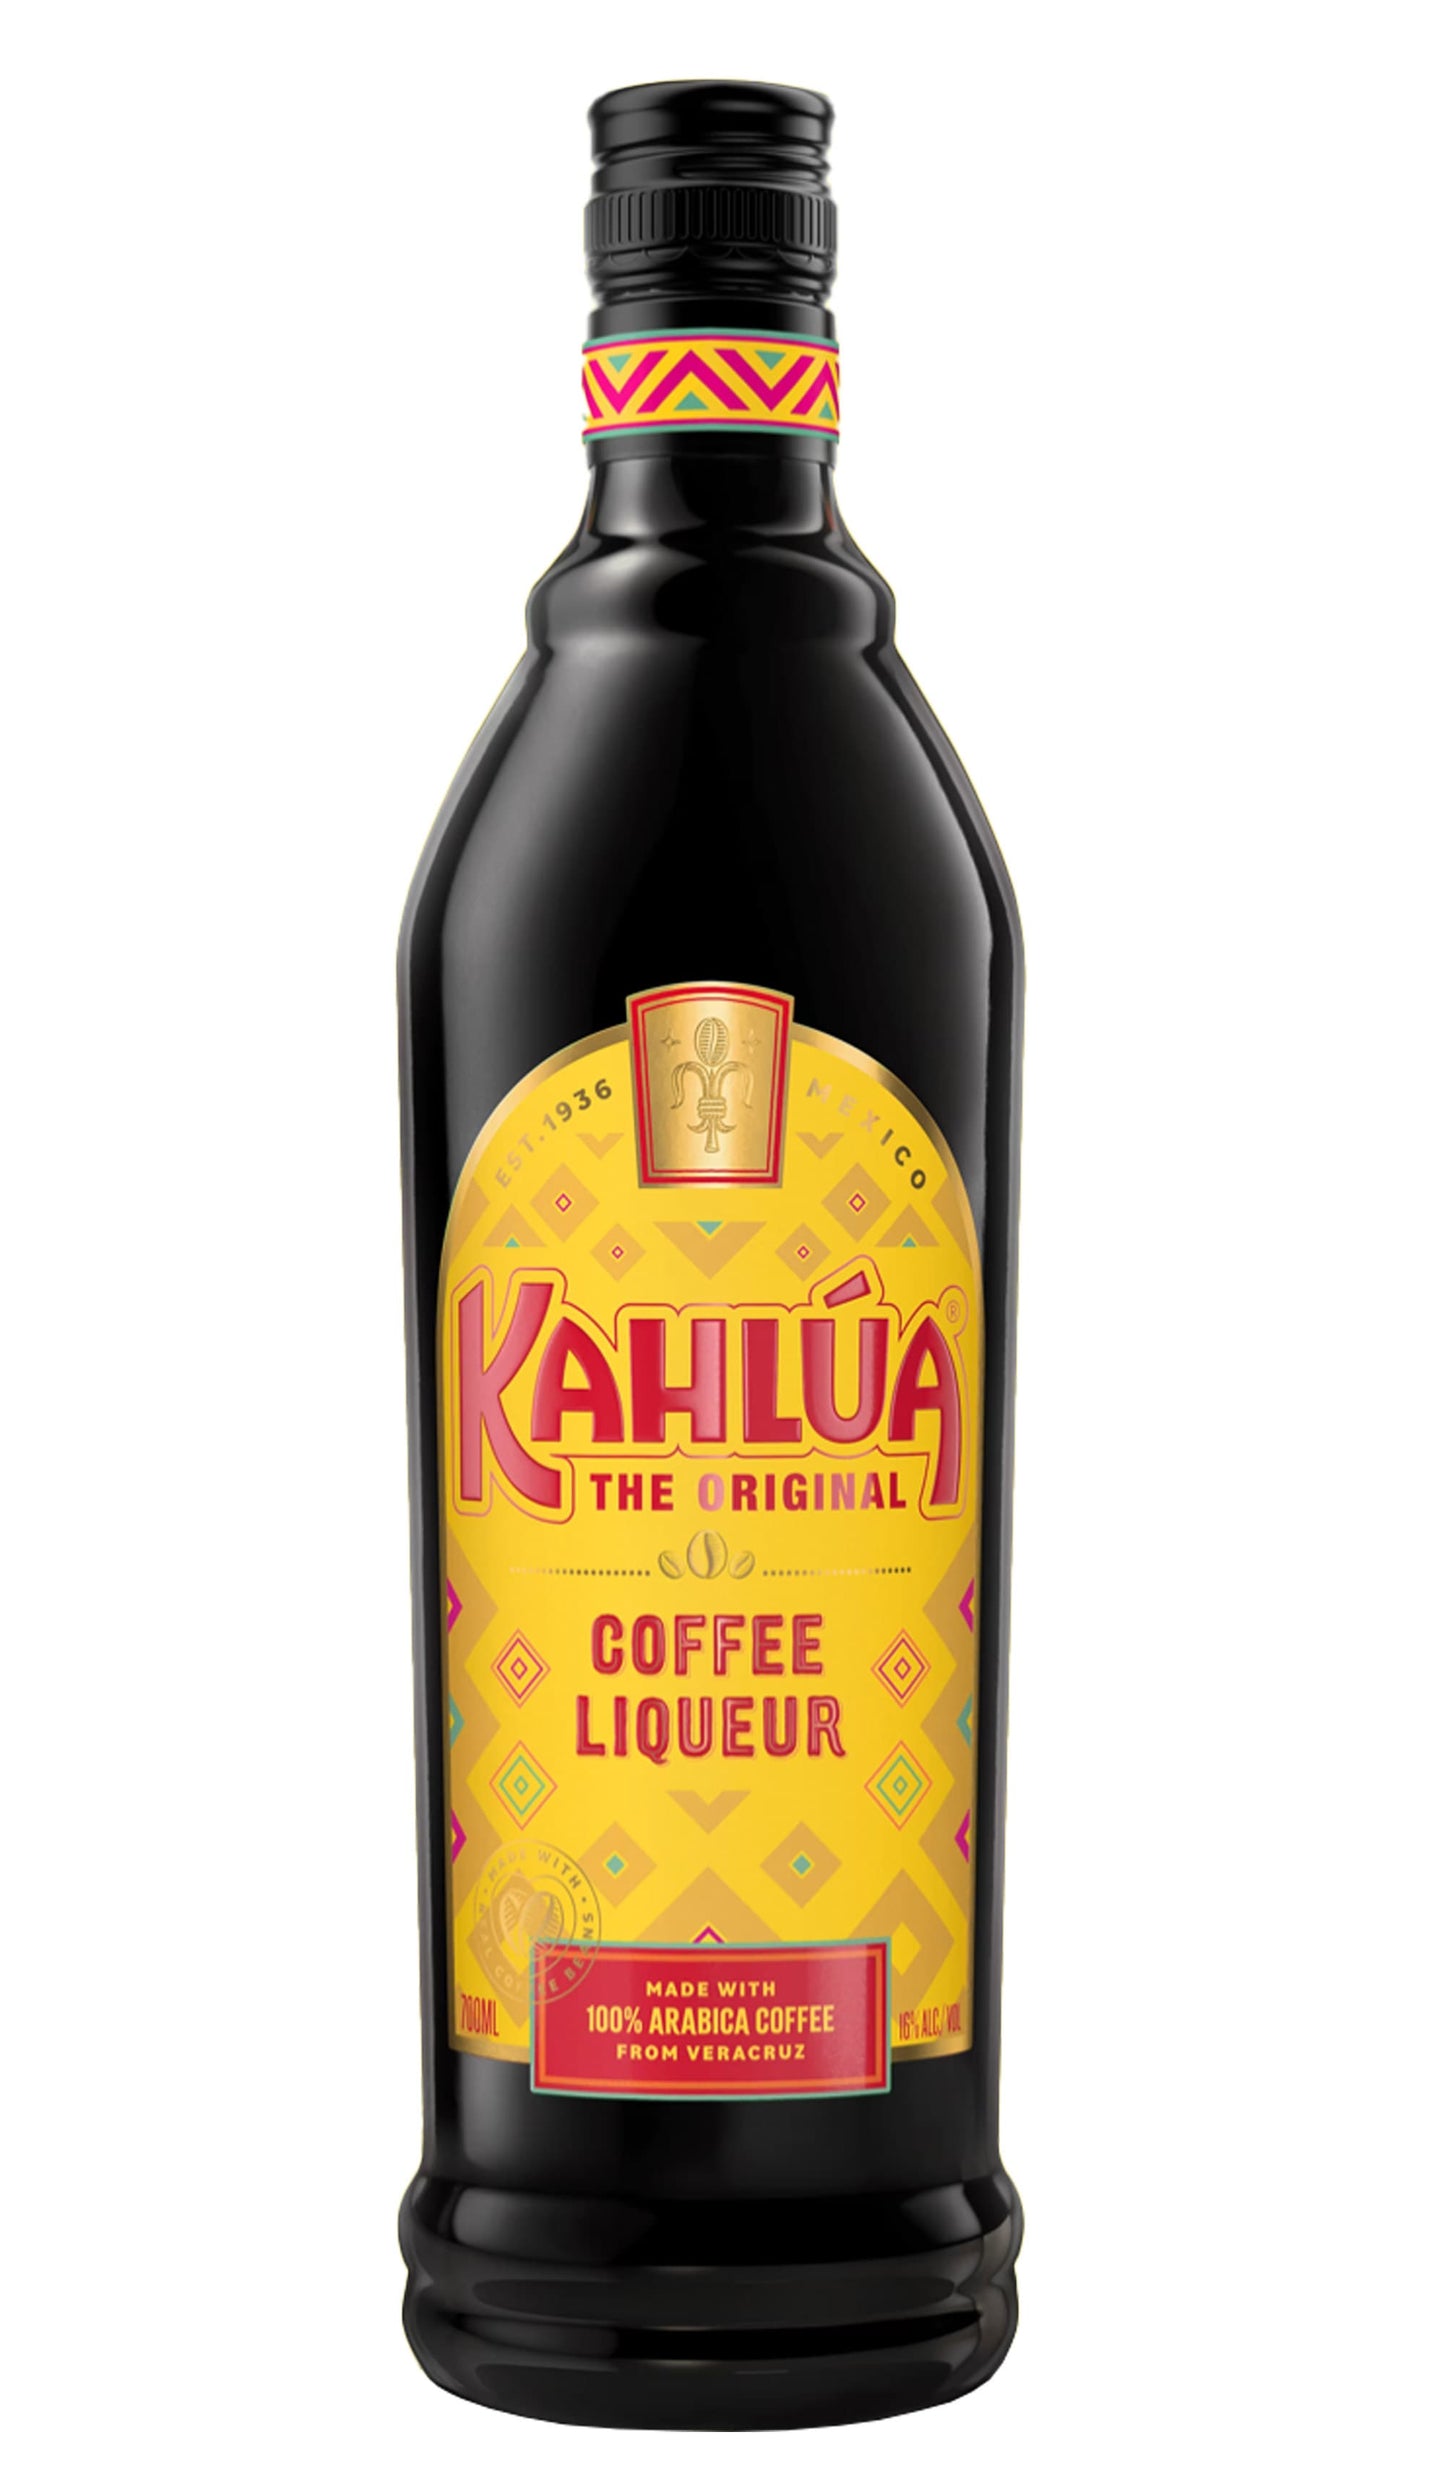 Find out more or buy Kahlua Original Coffee Liqueur 700ml online at Wine Sellers Direct - Australia’s independent liquor specialists.